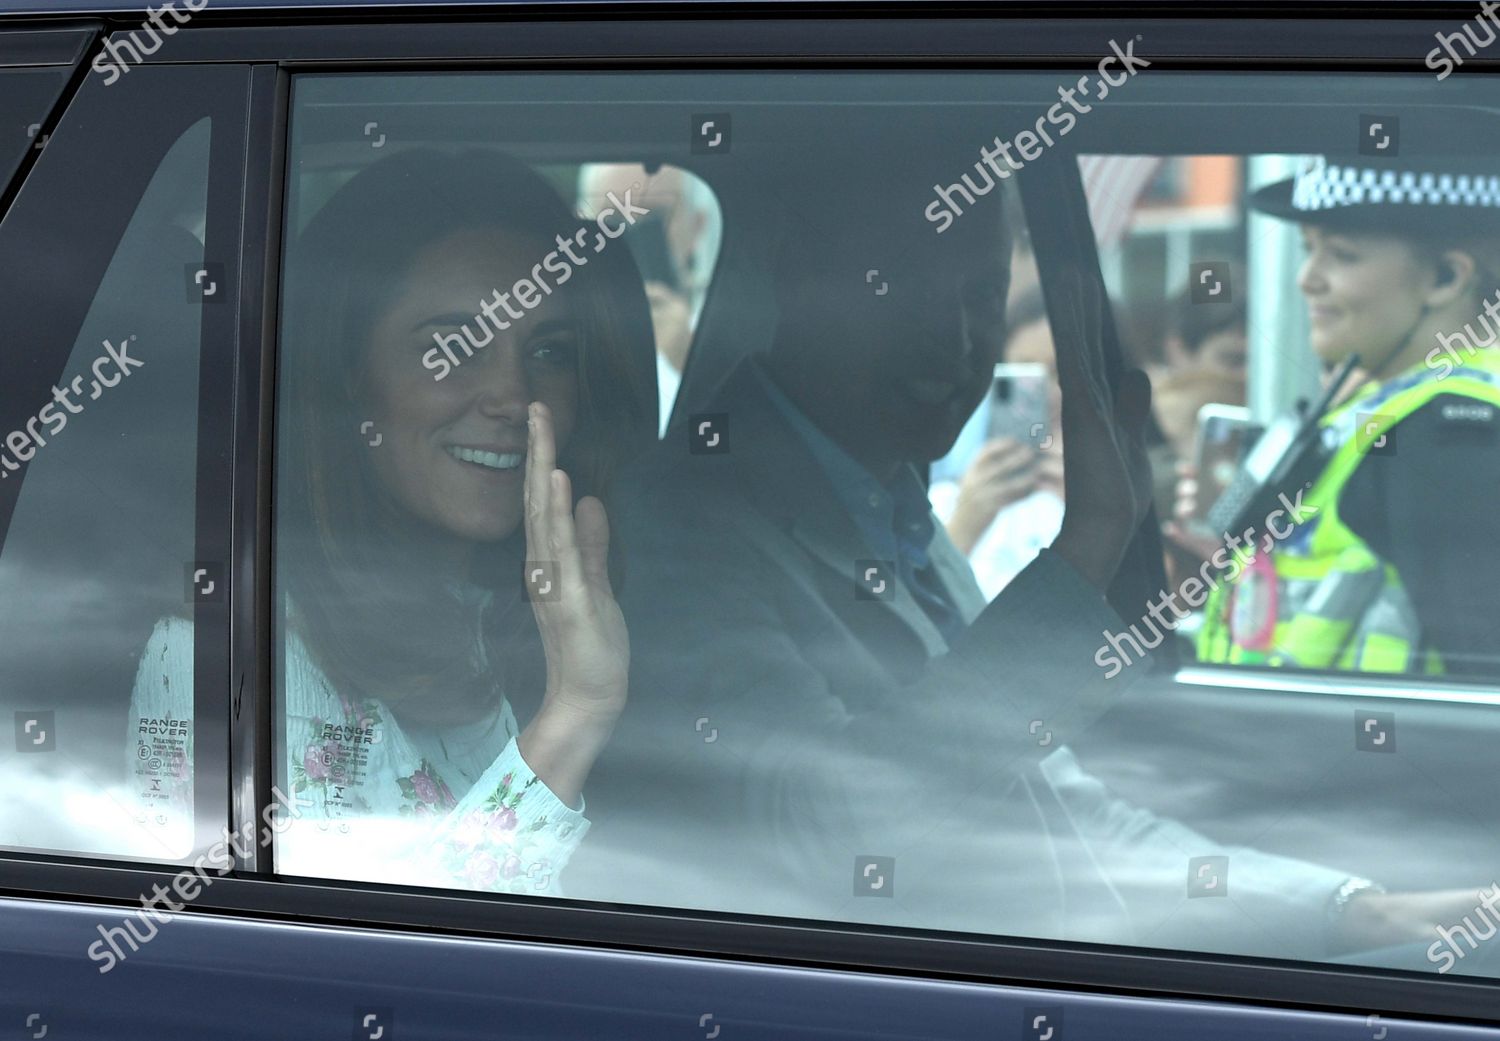 prince-william-and-catherine-duchess-of-cambridge-visit-to-barry-island-wales-uk-shutterstock-editorial-10733869at.jpg